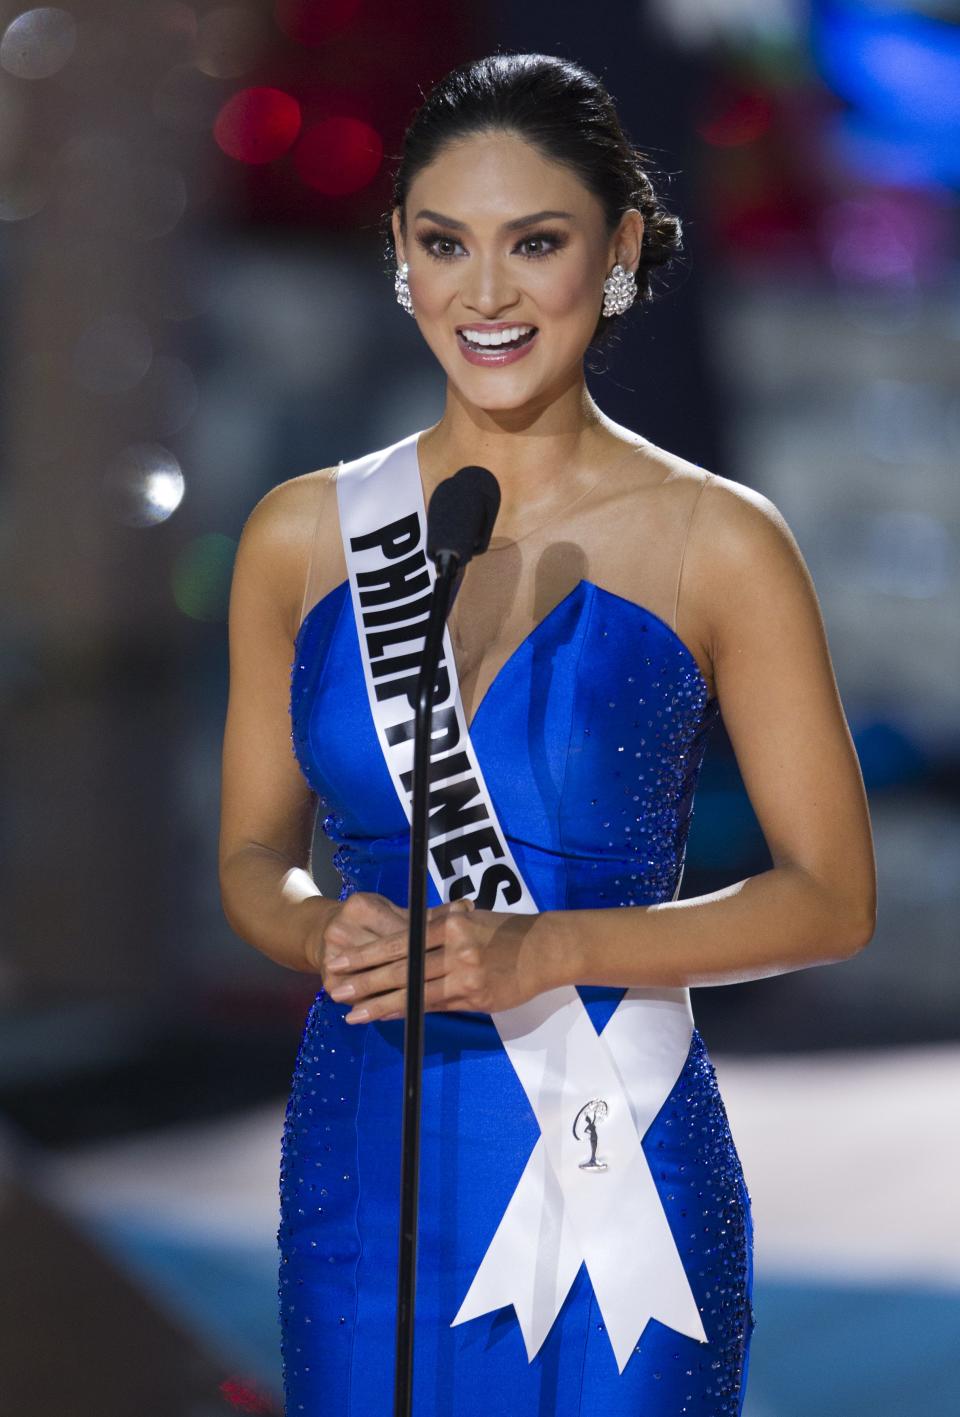 Miss Philippines Pia Alonzo Wurtzbach responds to a question during the 2015 Miss Universe Pageant in Las Vegas, Nevada December 20, 2015. Wurtzbach was later crowned Miss Universe. REUTERS/Steve Marcus ATTENTION EDITORS - FOR EDITORIAL USE ONLY. NOT FOR SALE FOR MARKETING OR ADVERTISING CAMPAIGNS